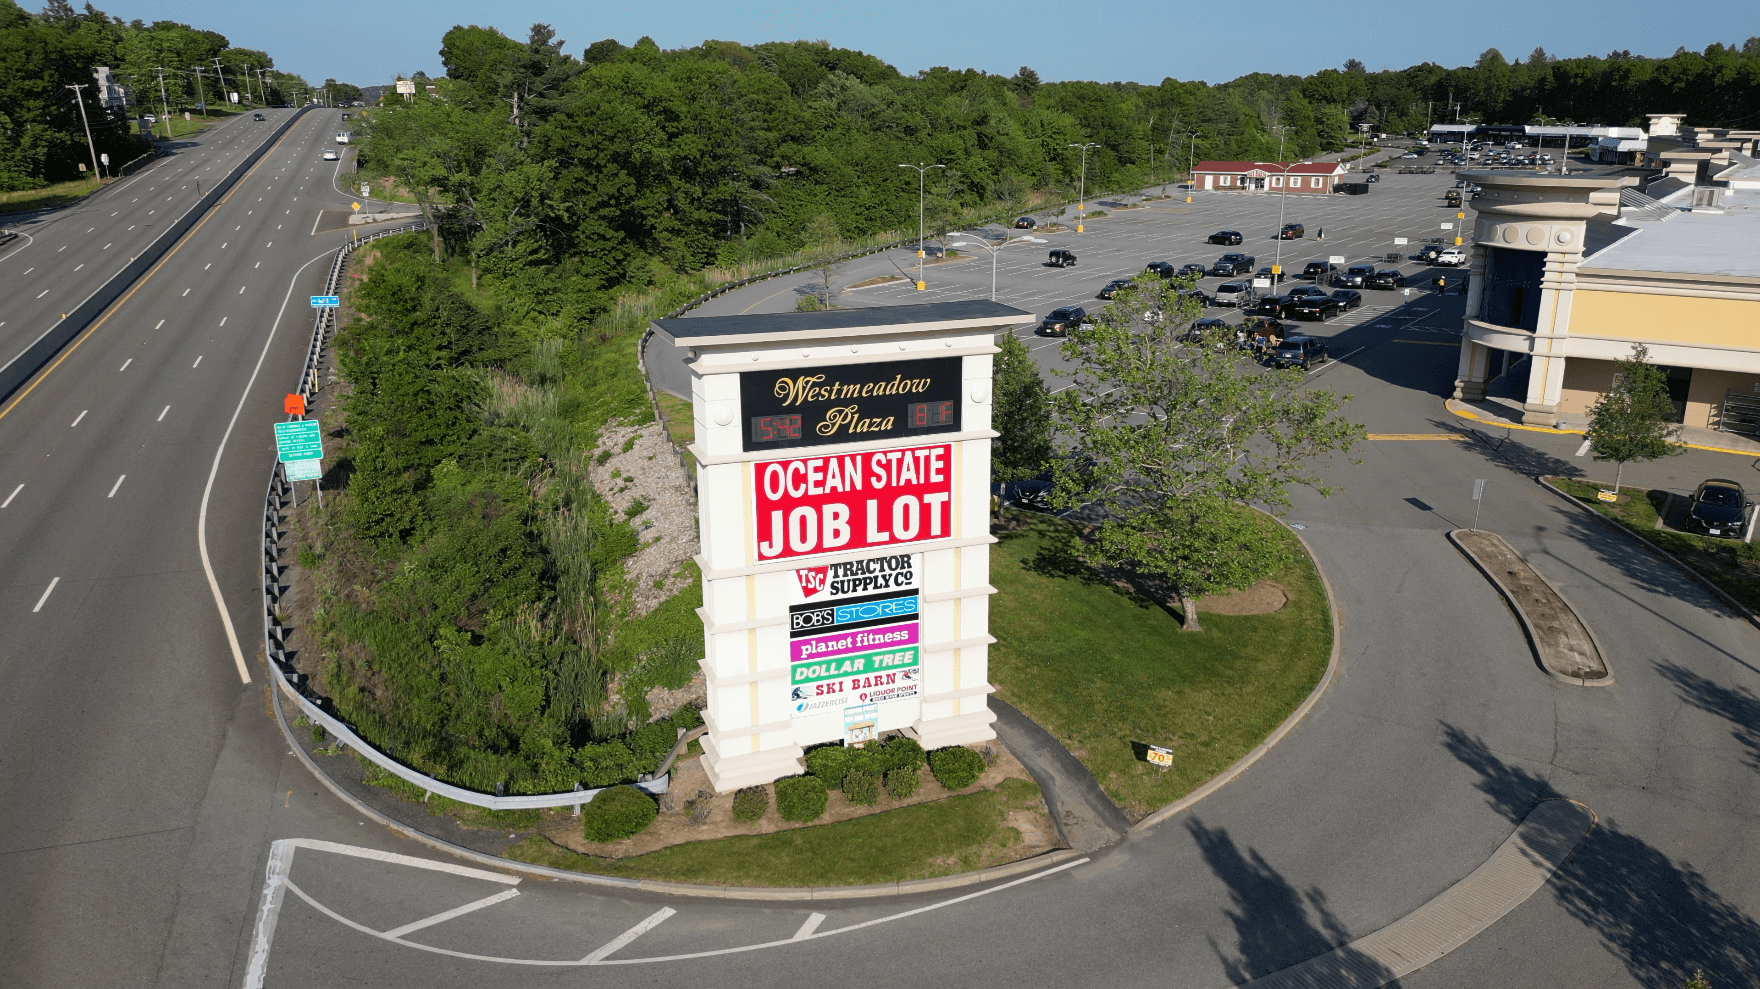 Ocean State Job Lot store plaza sign.